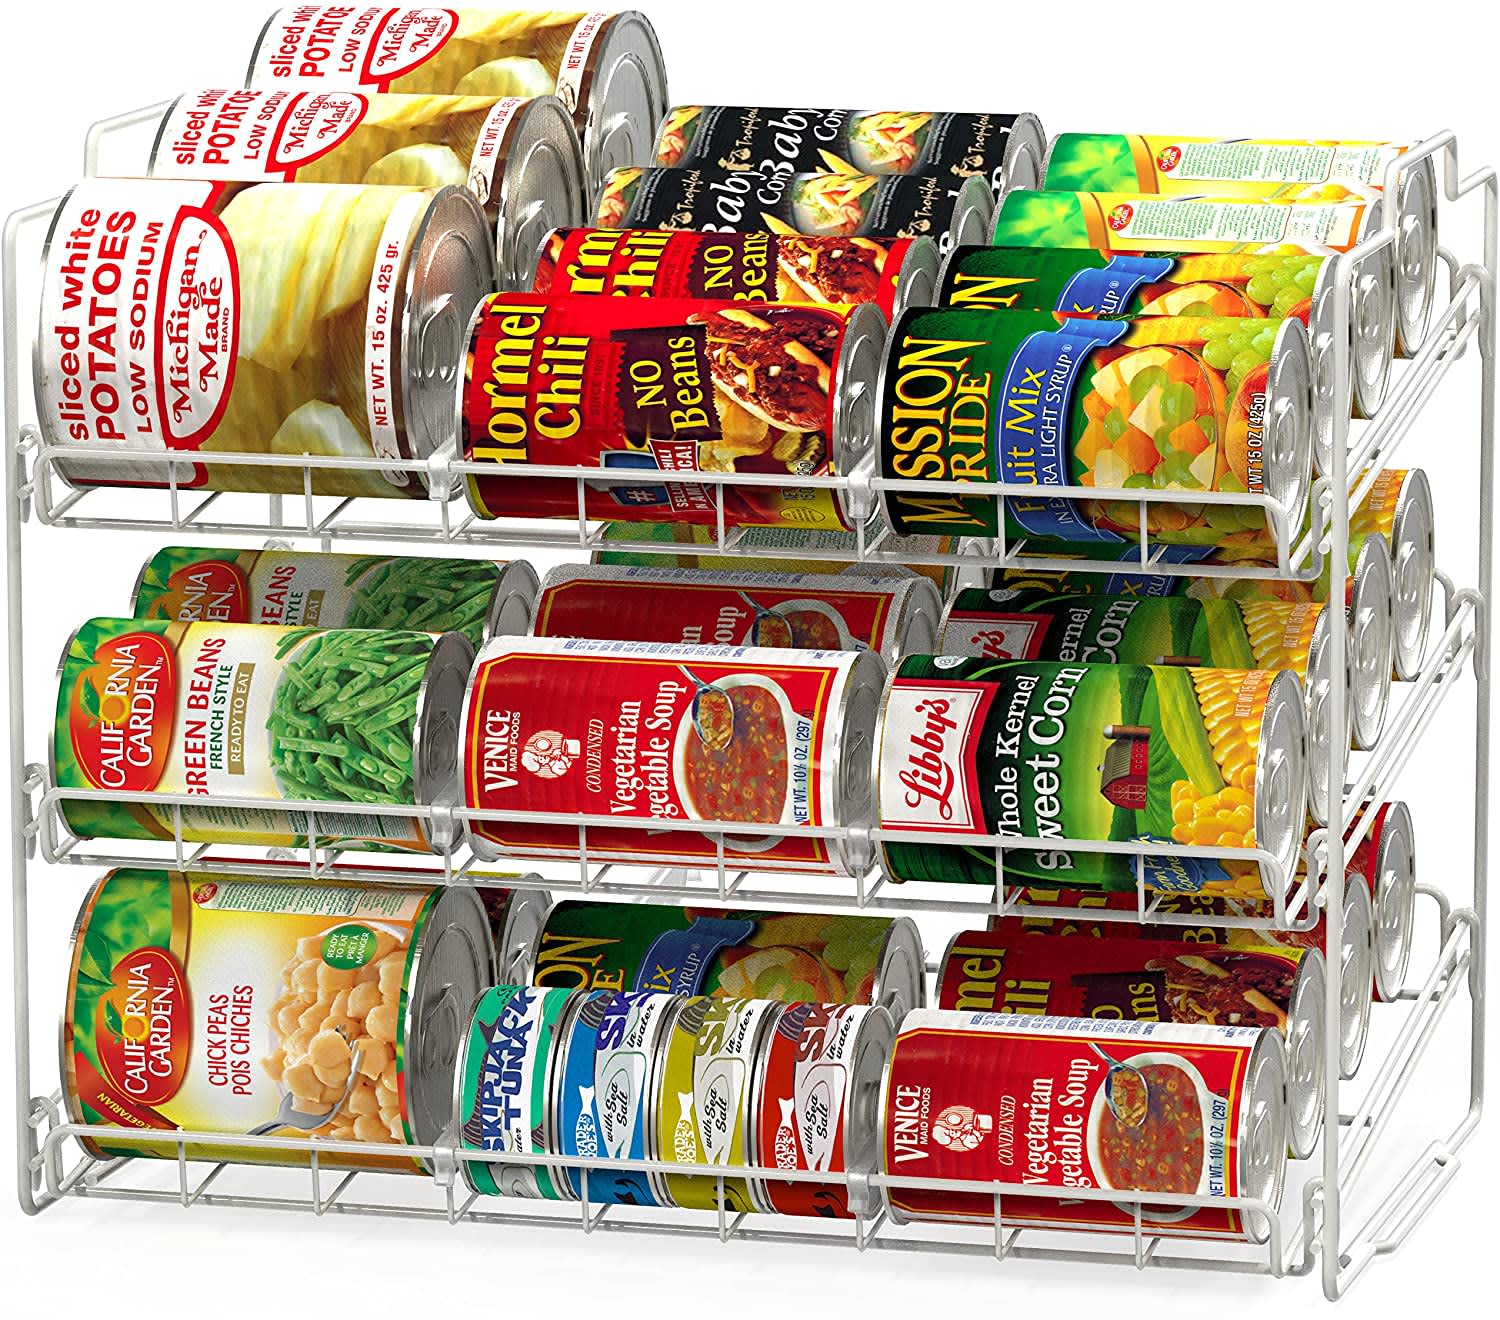 7 Clever Canned Food Storage & Organizing Ideas